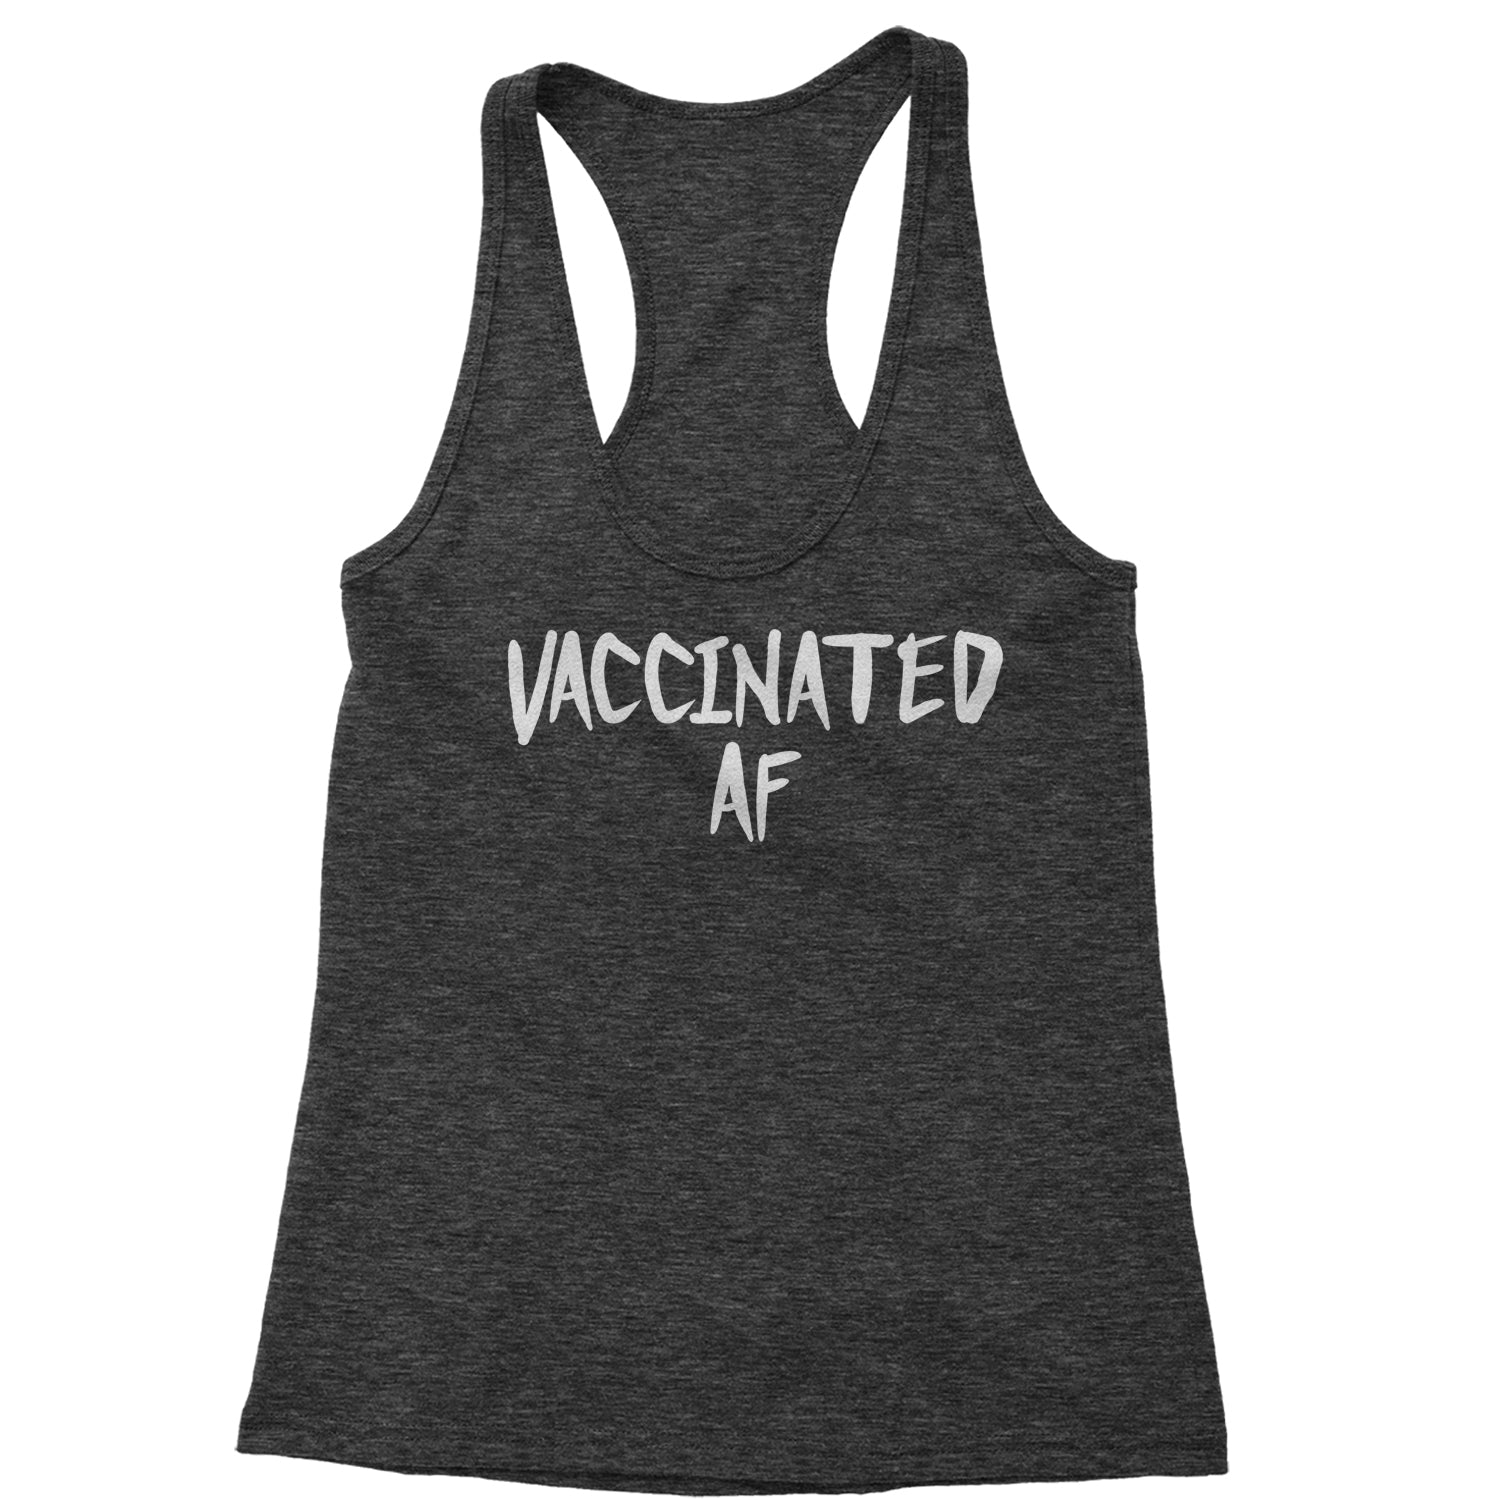 Vaccinated AF Pro Vaccine Funny Vaccination Health Racerback Tank Top for Women moderna, pfizer, vaccine, vax, vaxx by Expression Tees